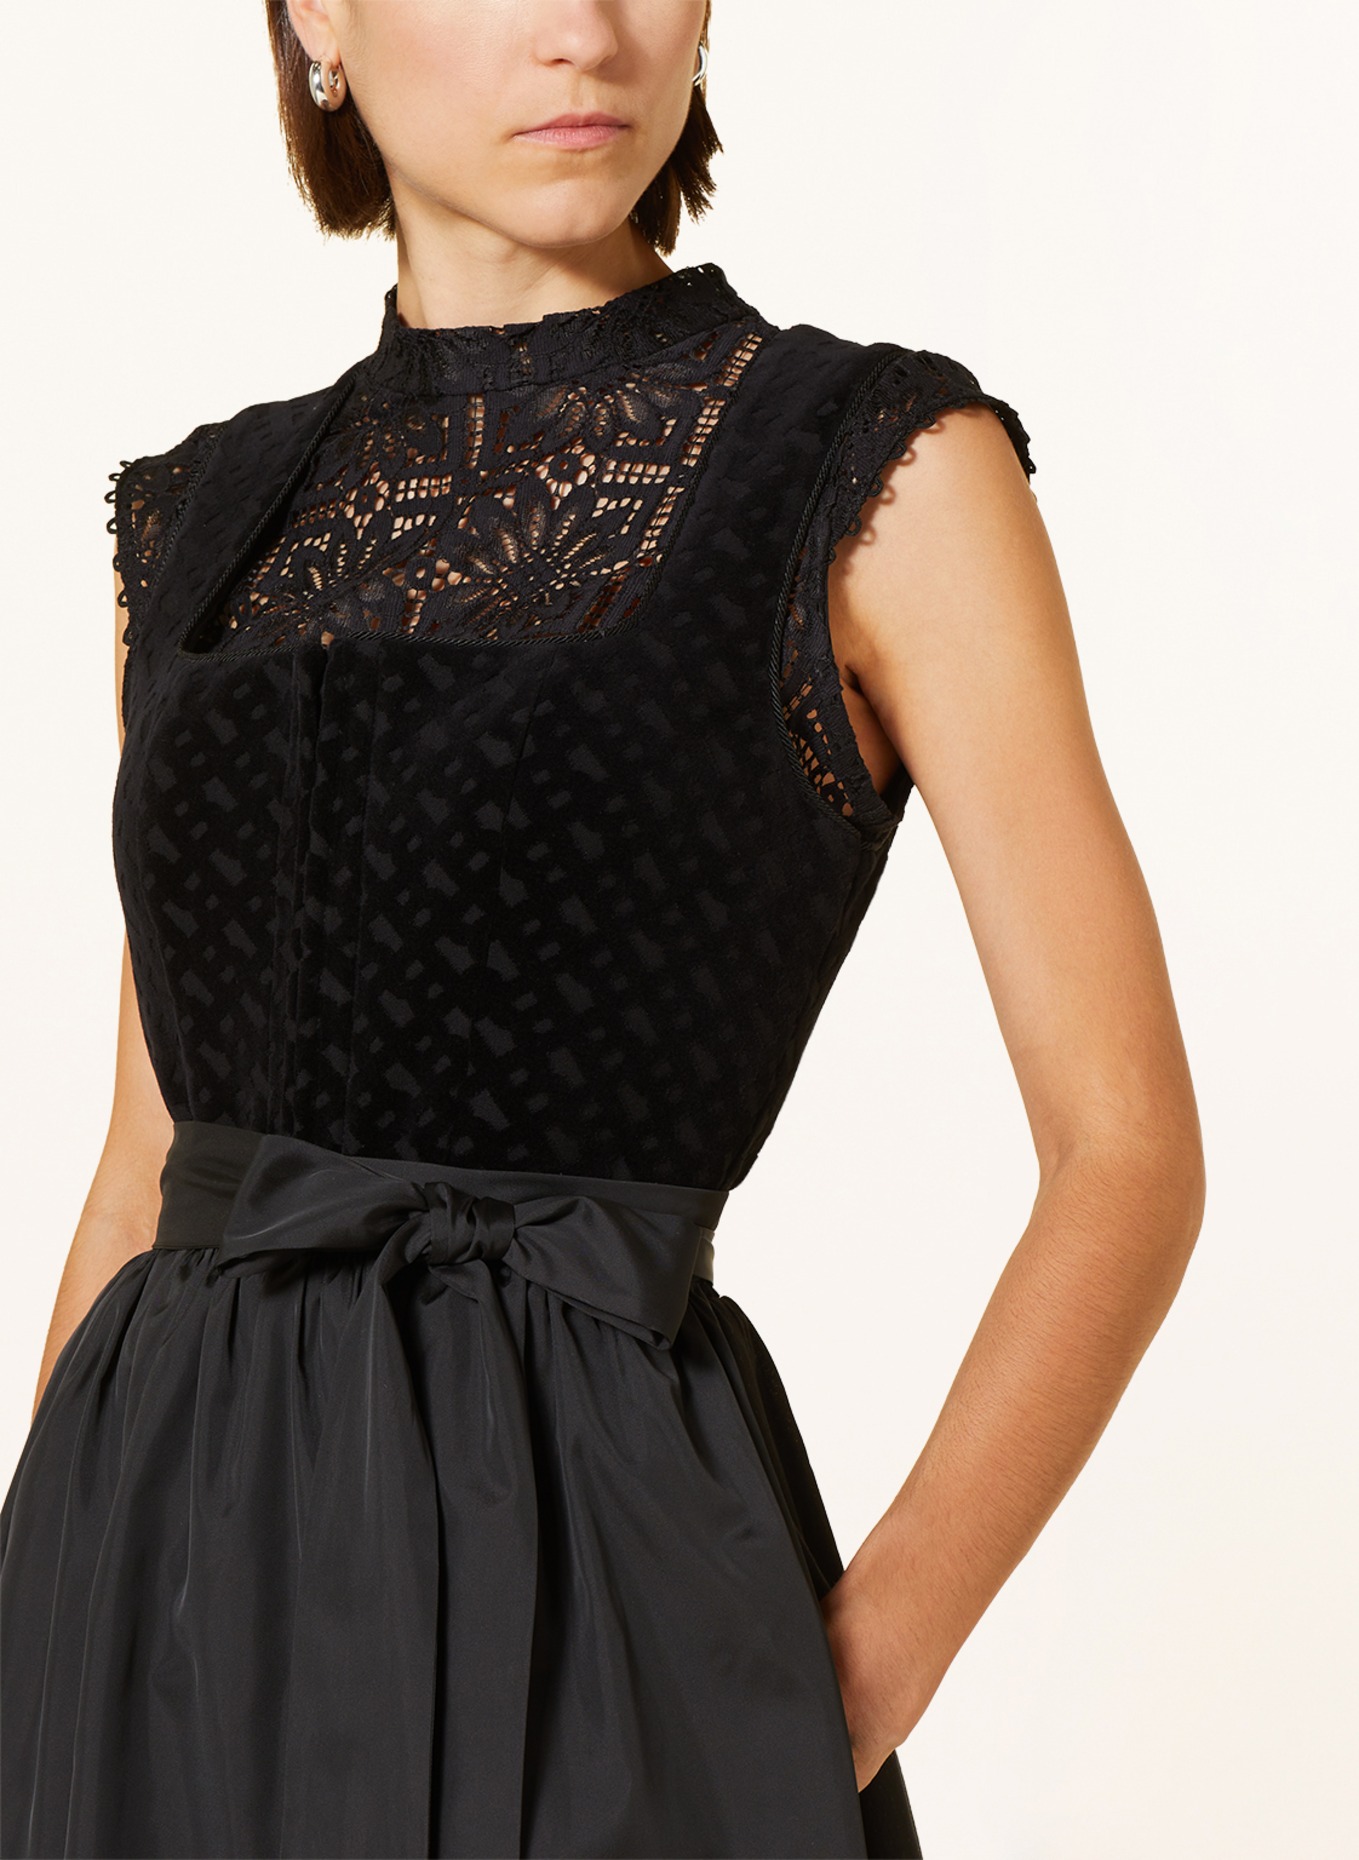 BOSS Dirndl blouse CARIN made of crochet lace, Color: BLACK (Image 3)